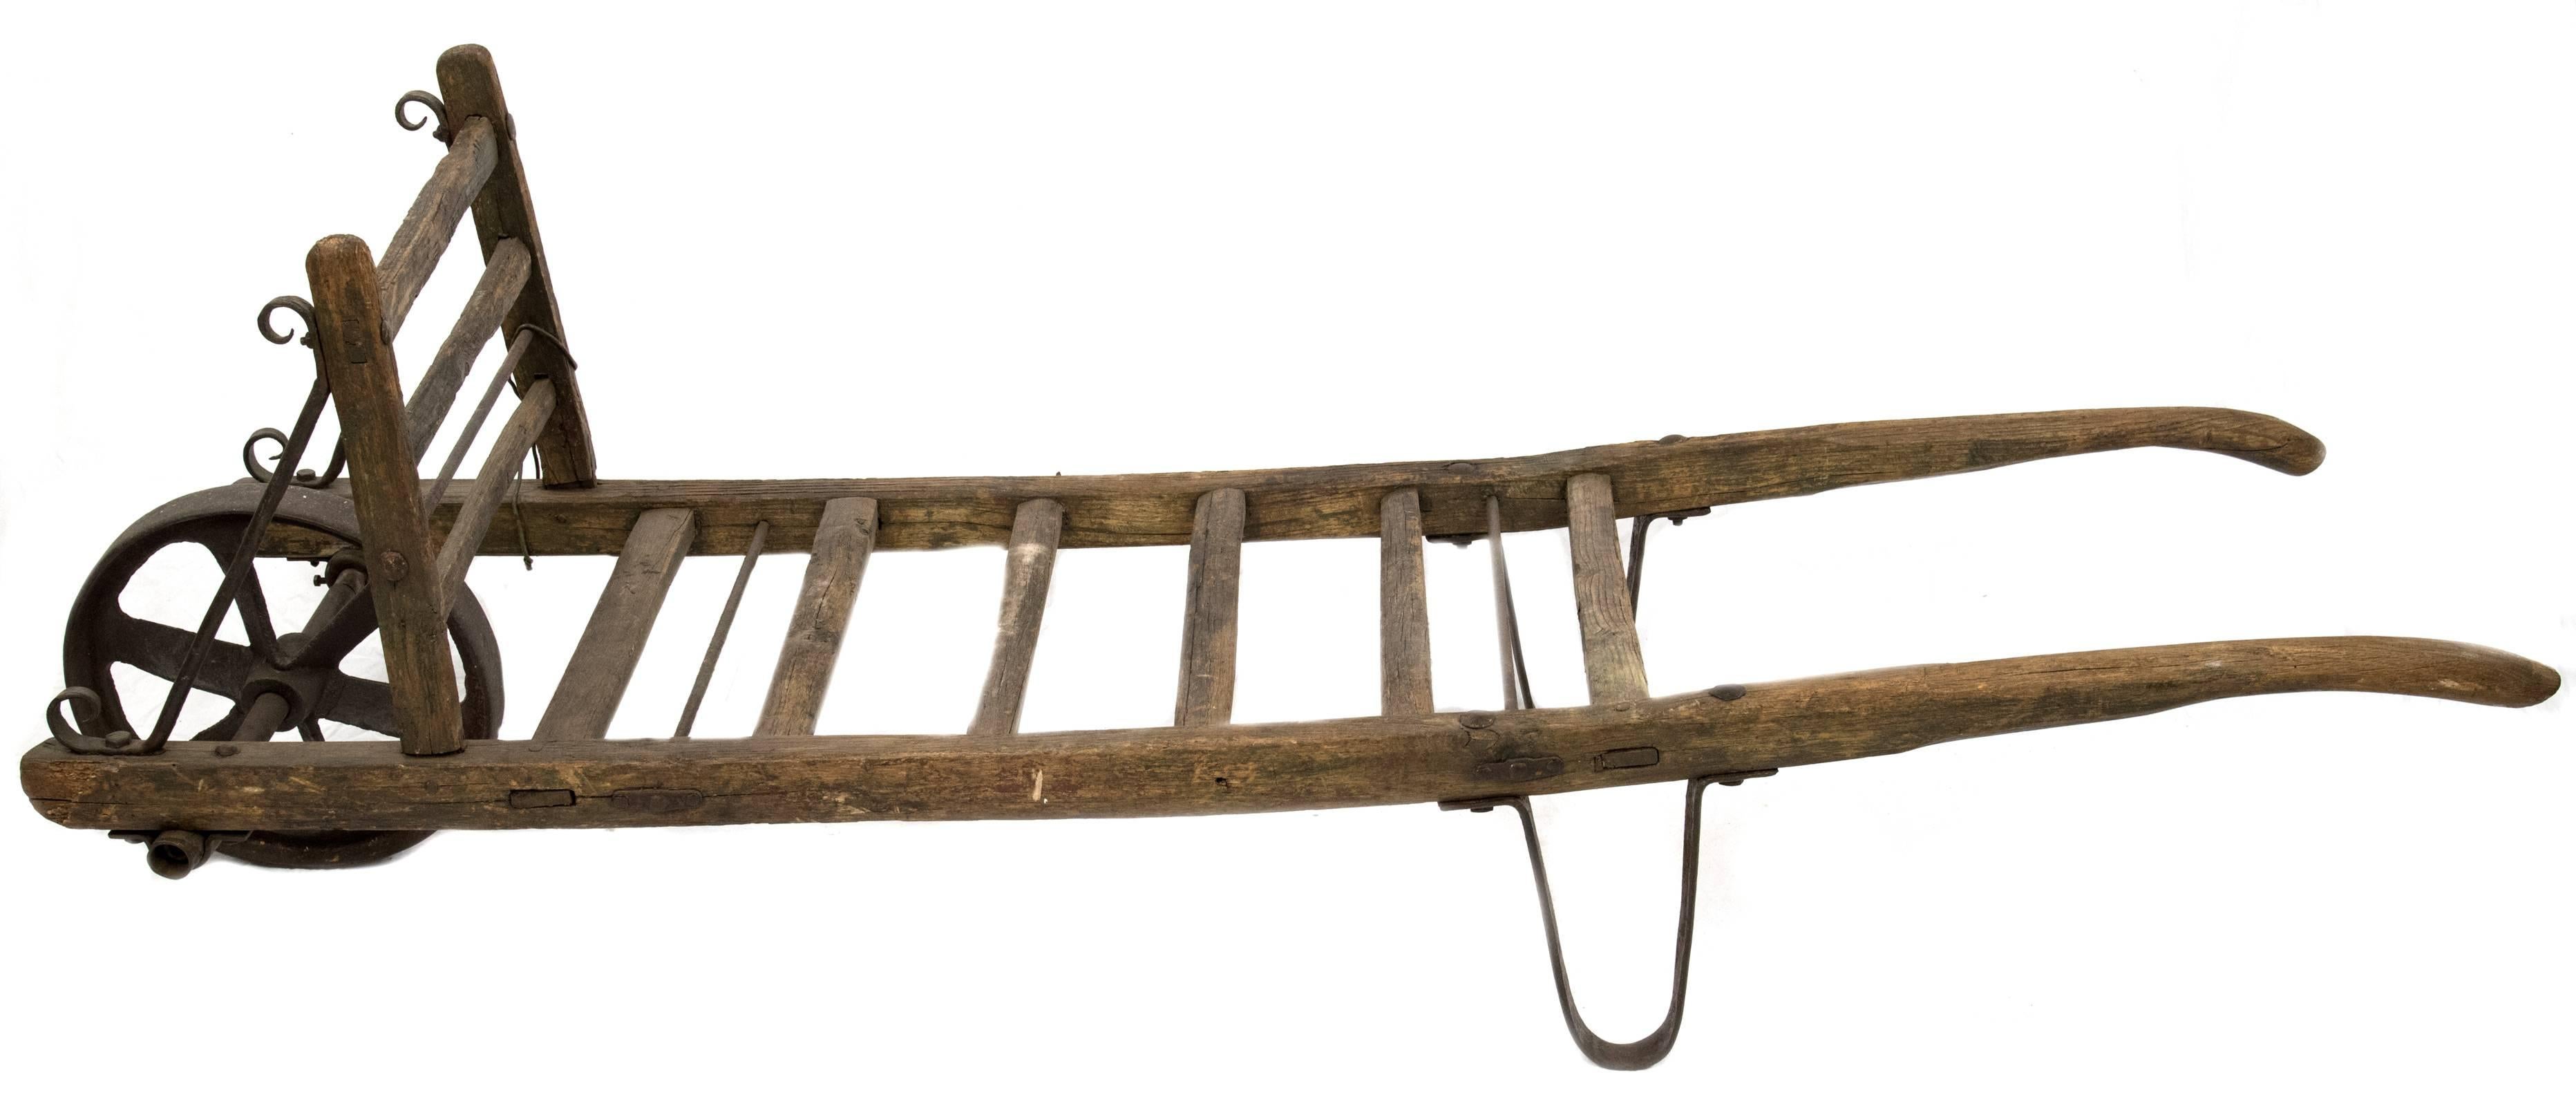 A walnut and cast iron hand truck made in France during the fourth quarter of the 19th century and used for the transportation of oak wine barrels.